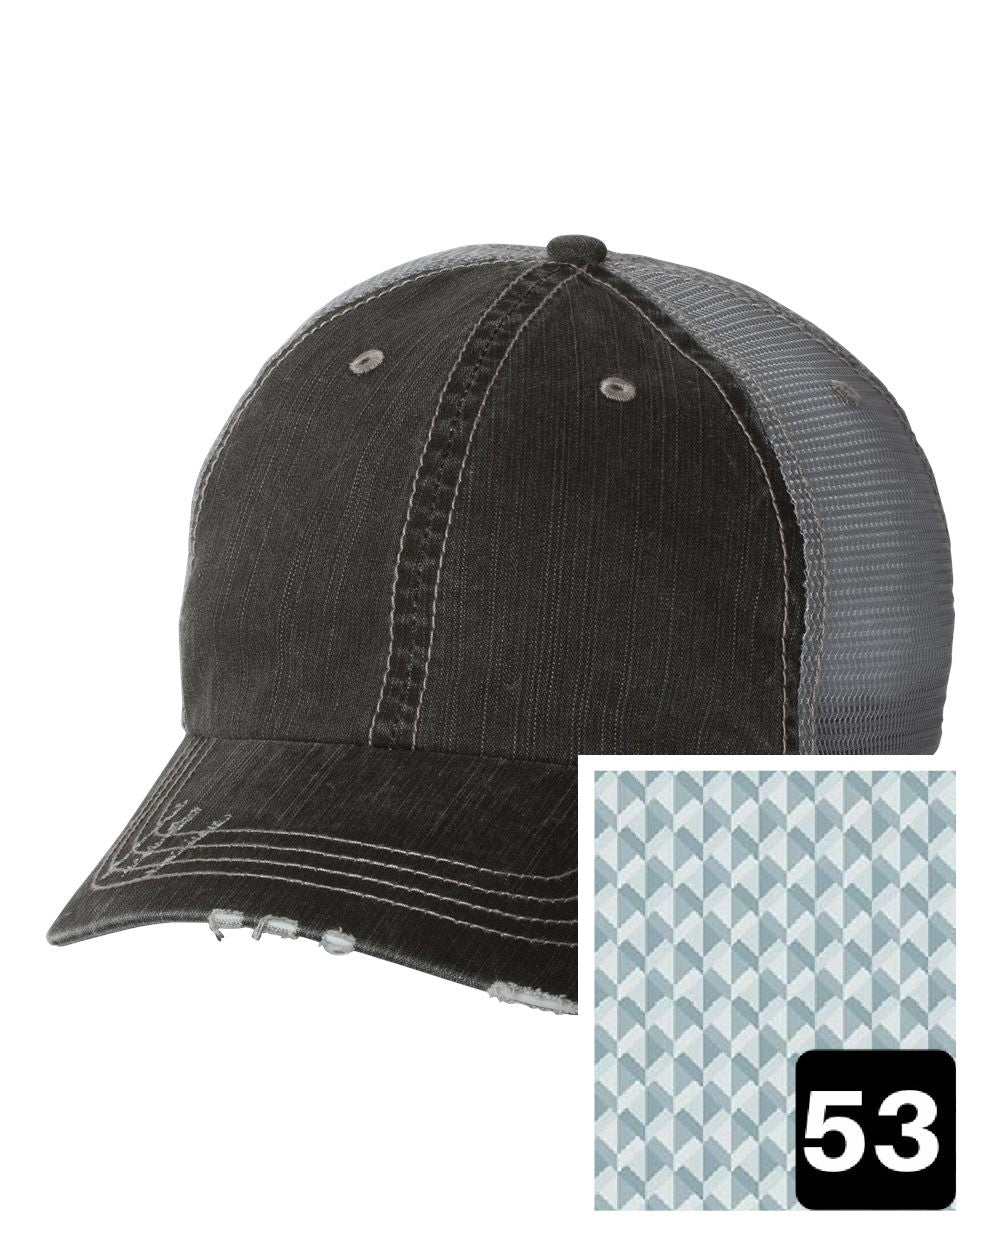 gray distressed trucker hat with multi-color stripe fabric state of Louisiana